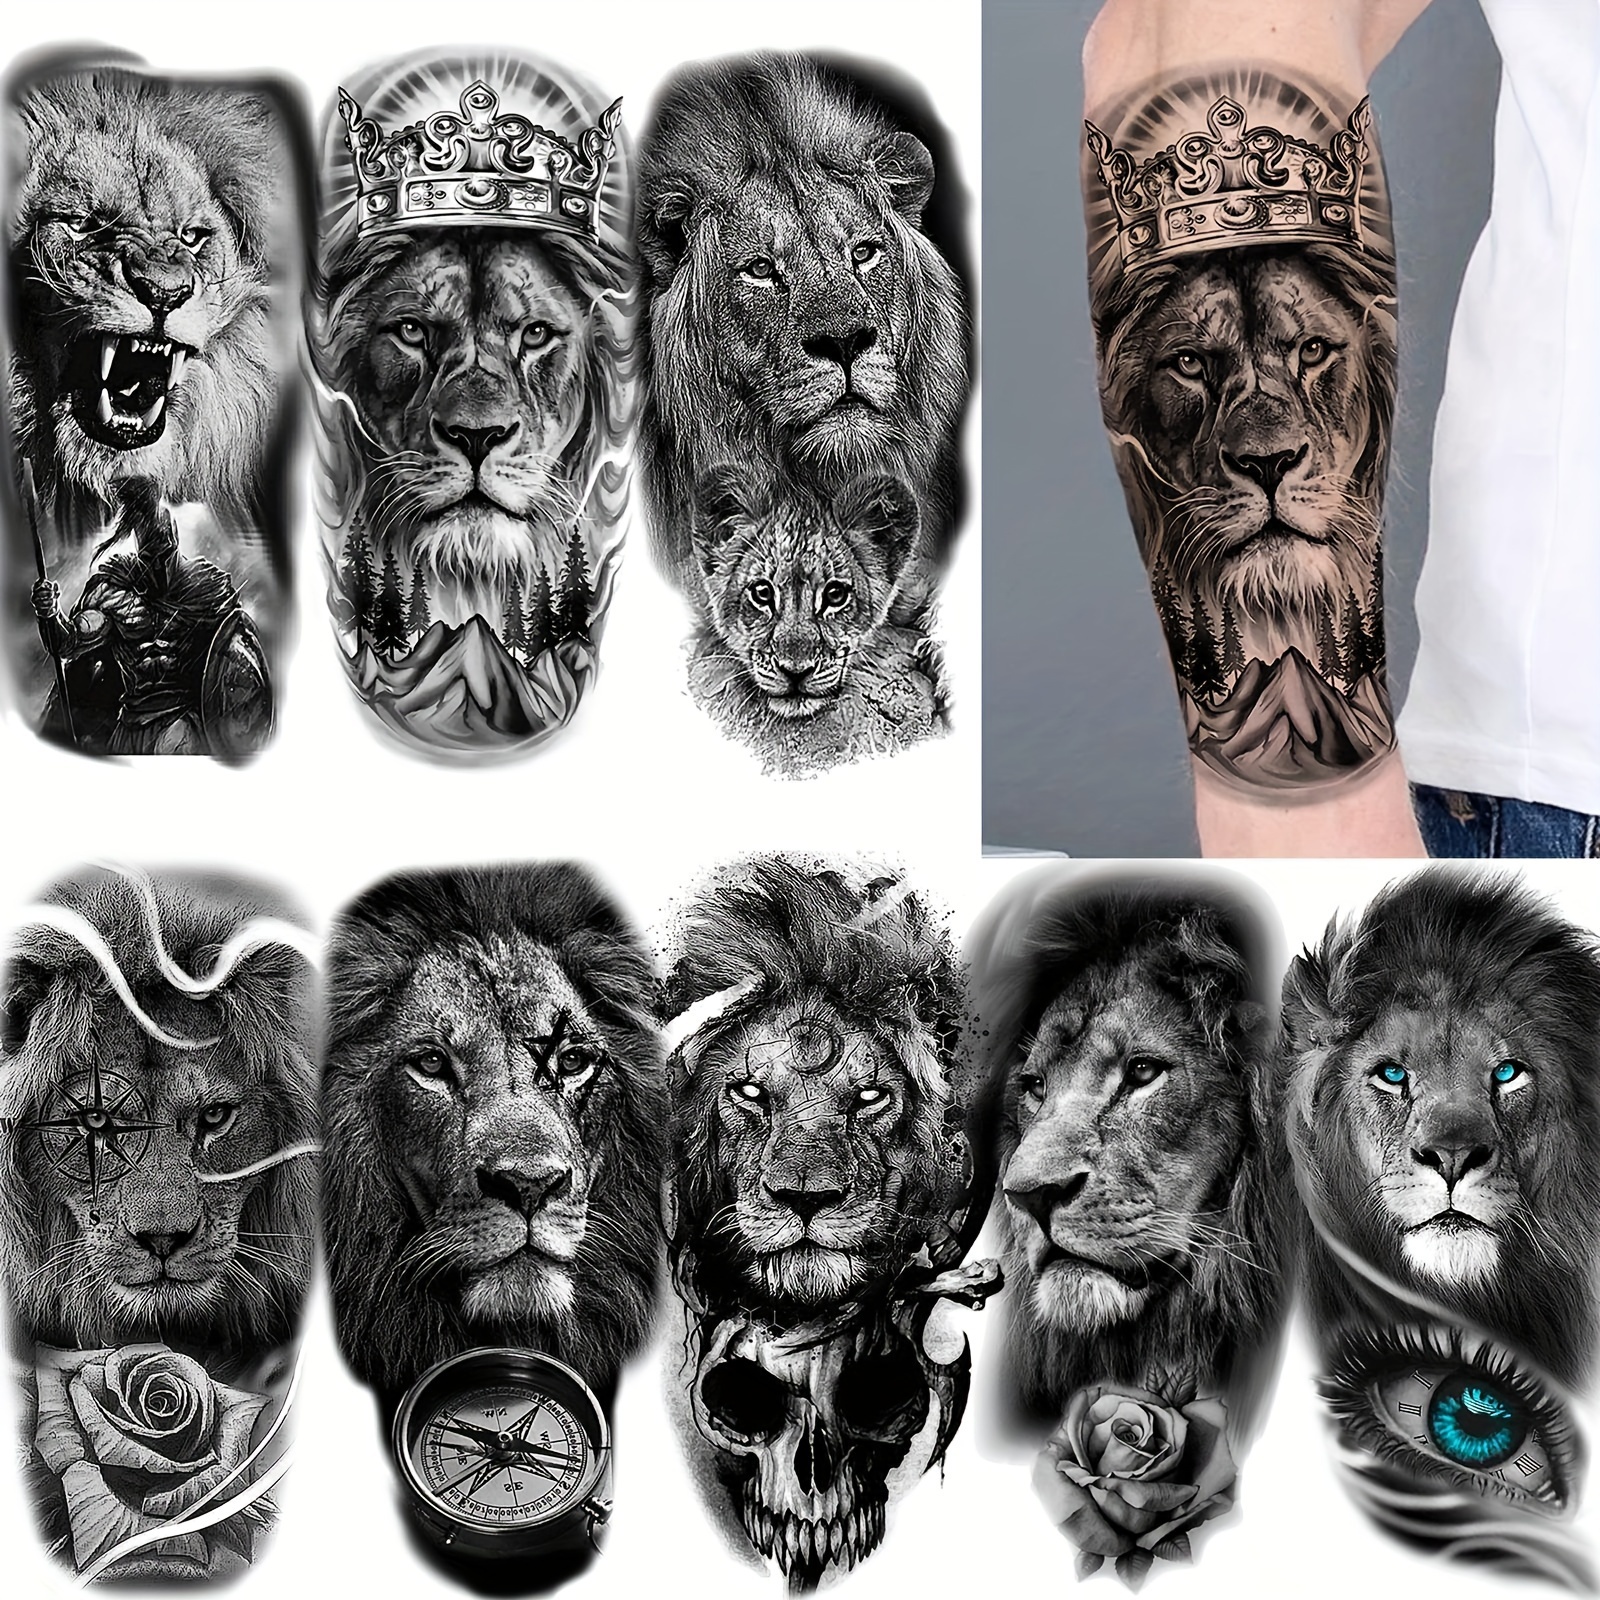 

8-piece Realistic Black & Lion Temporary Tattoos - Waterproof, Long-lasting Body Art Stickers For Men & Women, Perfect For Halloween Makeup & Party Favors